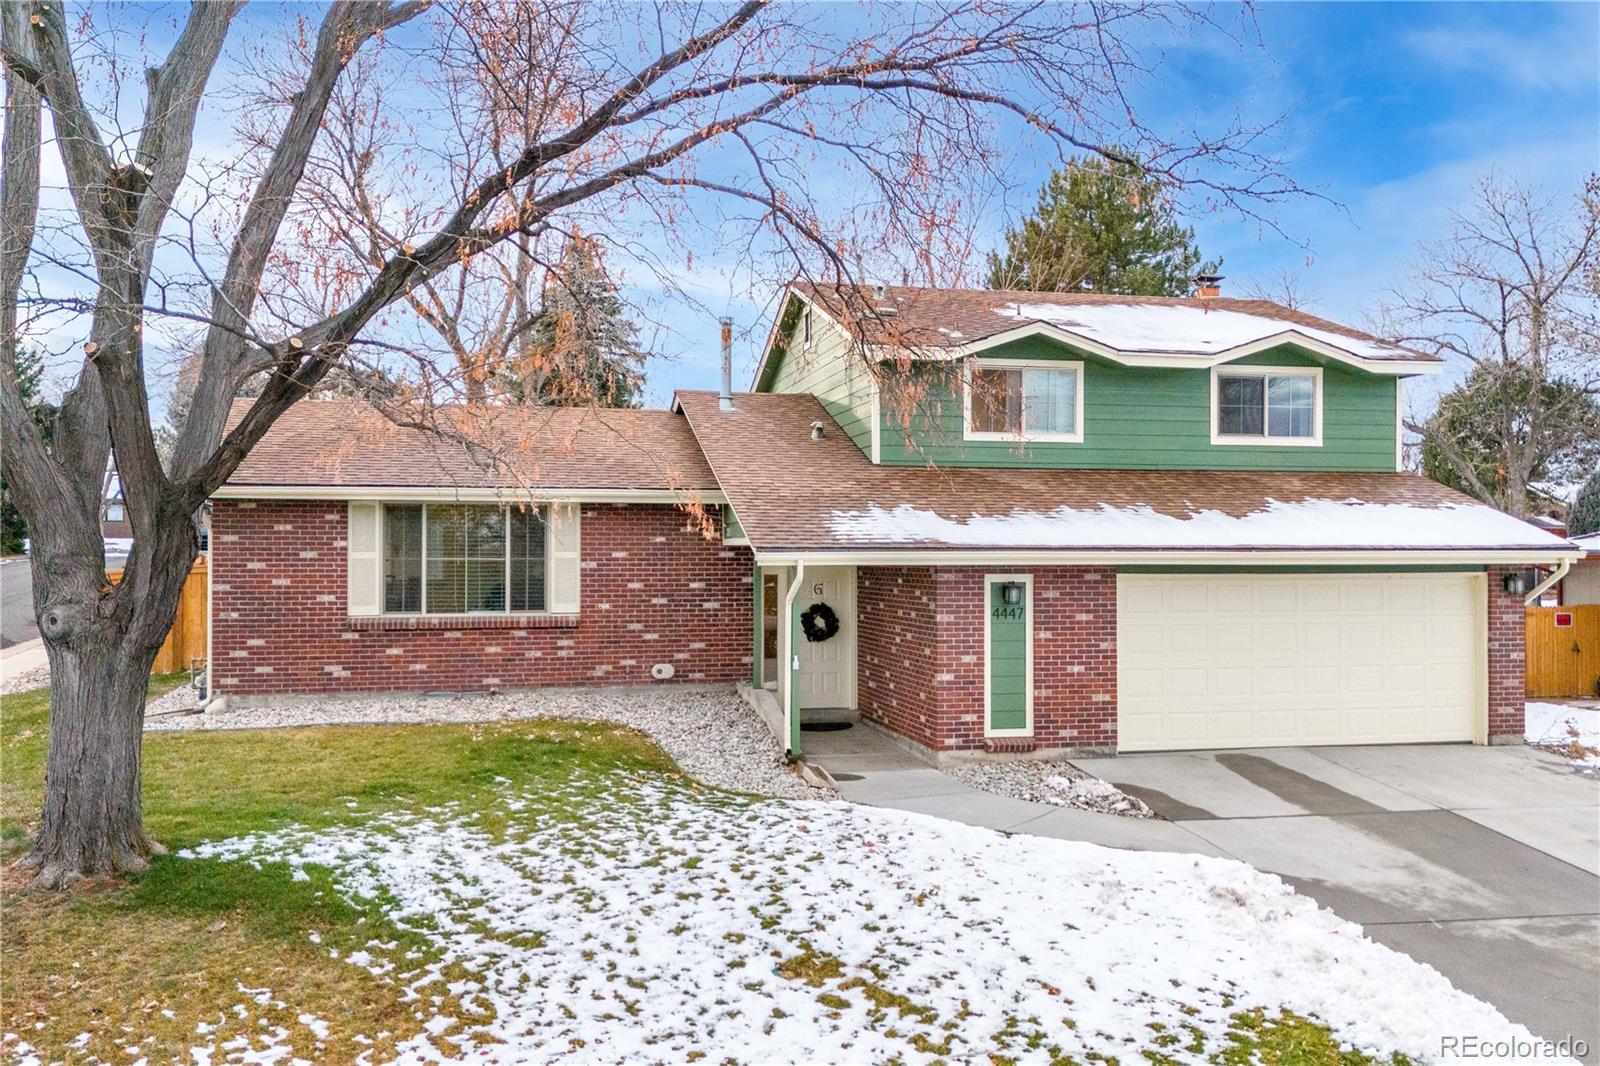 Report Image for 4447 S Wolff Street,Denver, Colorado